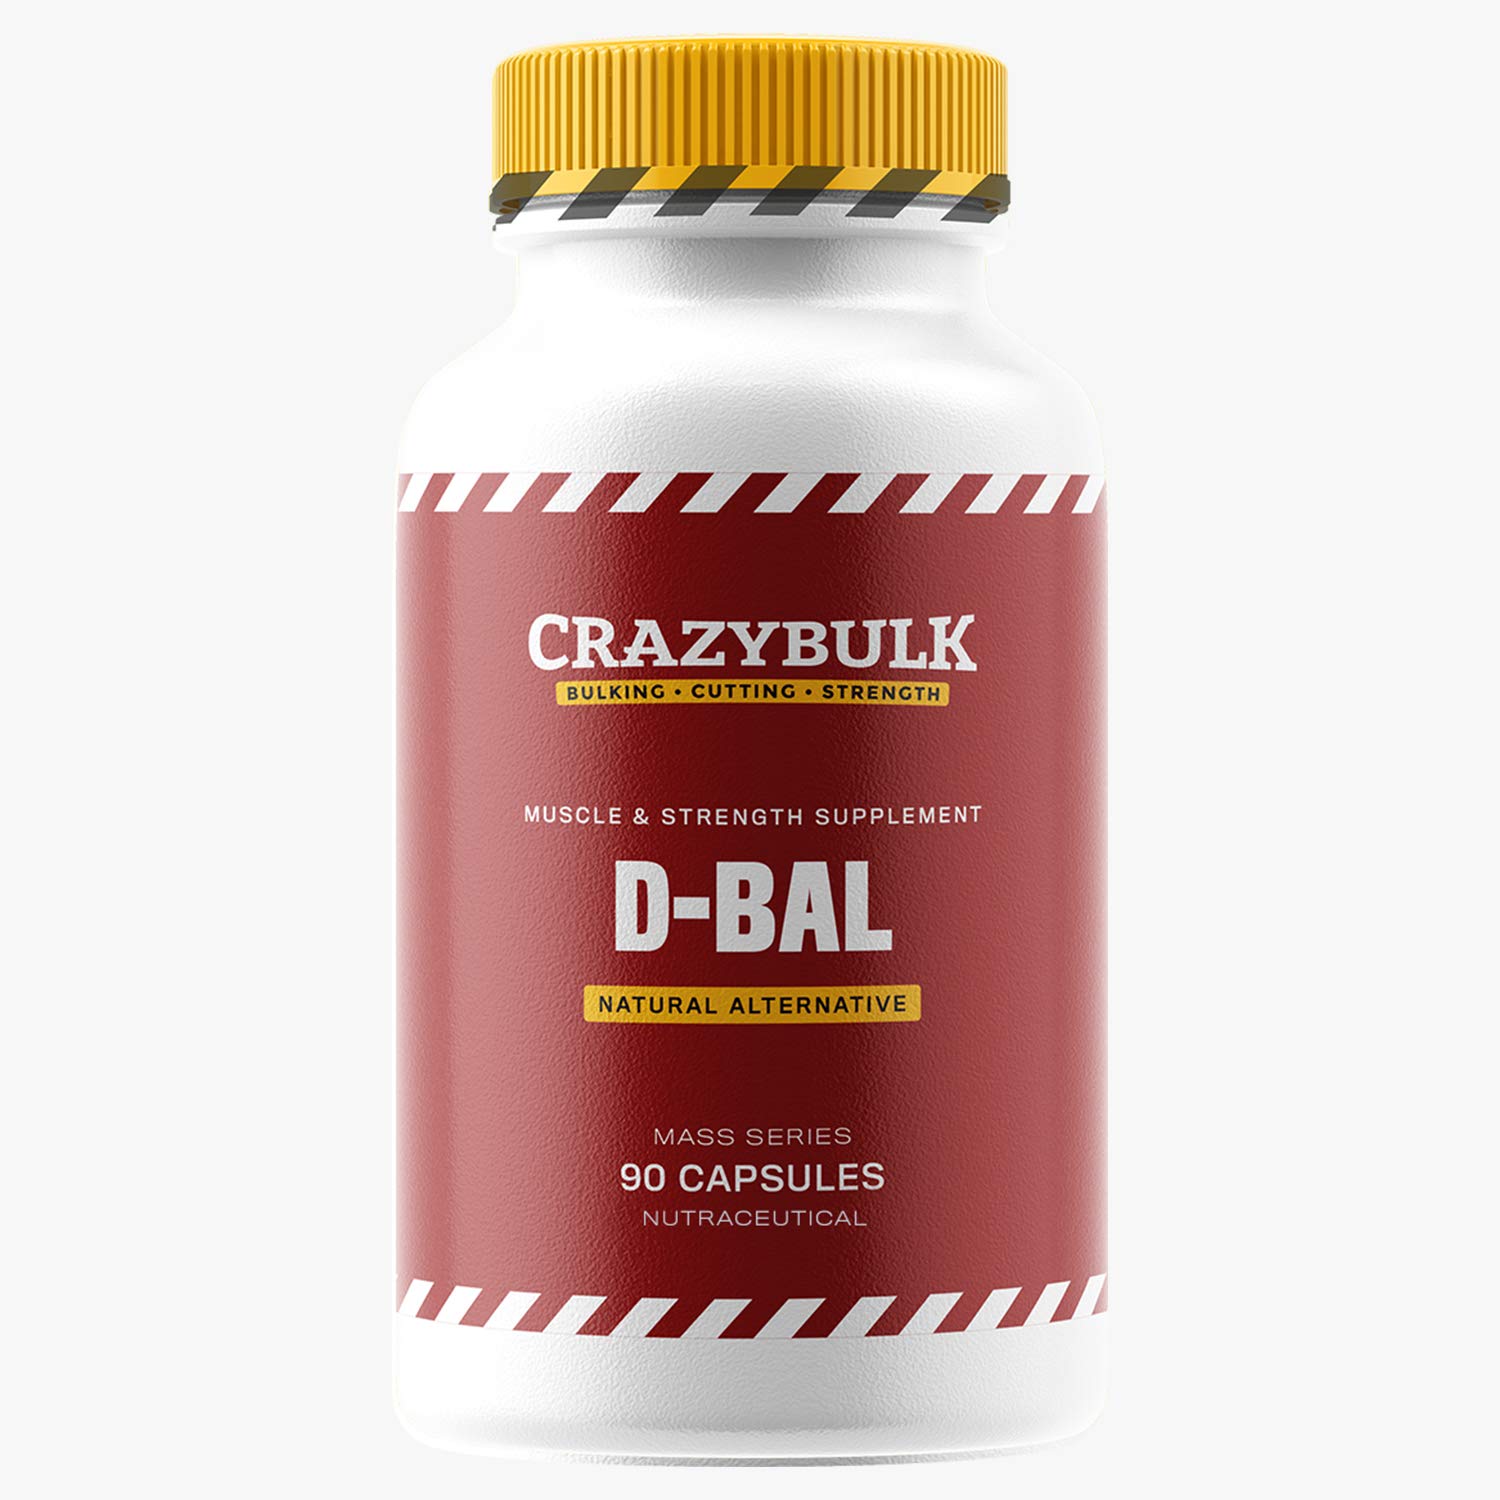 dbal - Does Dianabol Causes Water Retention?